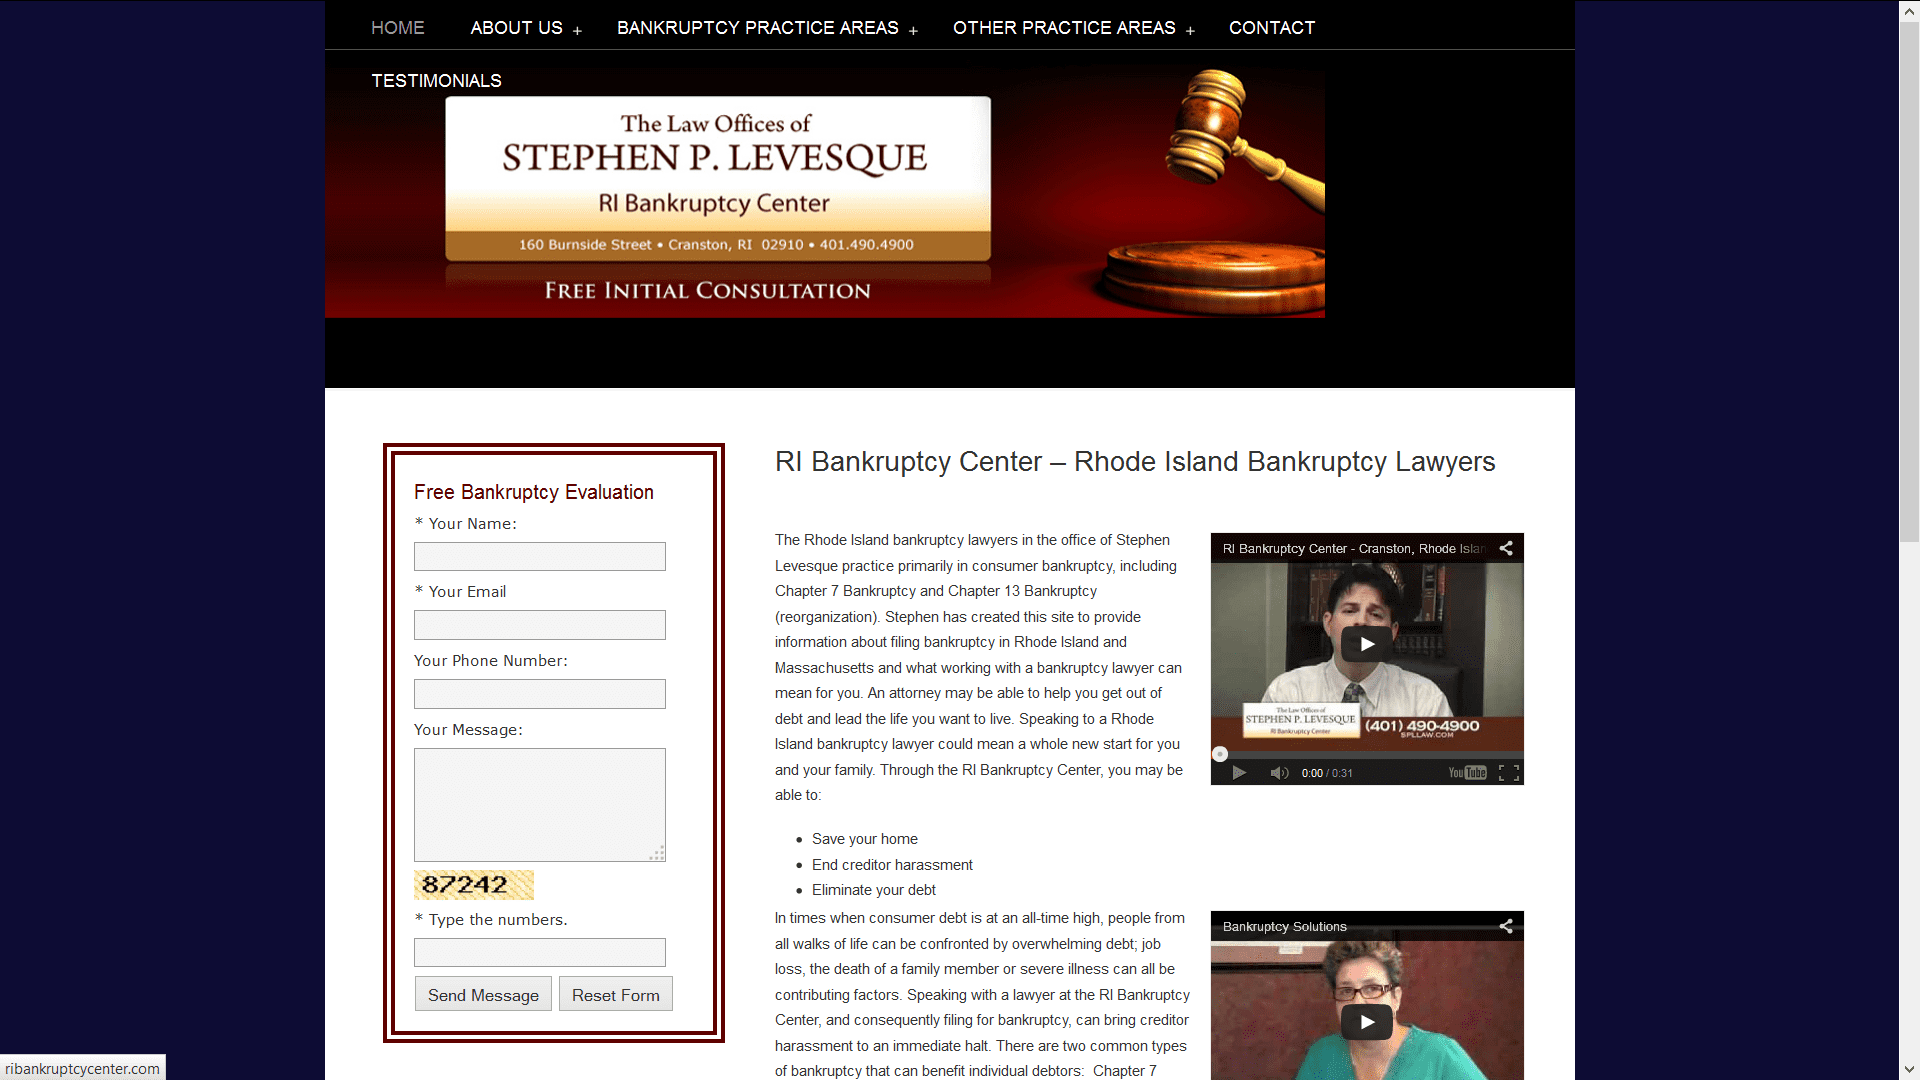 Law Offices of Stephen P. Levesque Website Copy